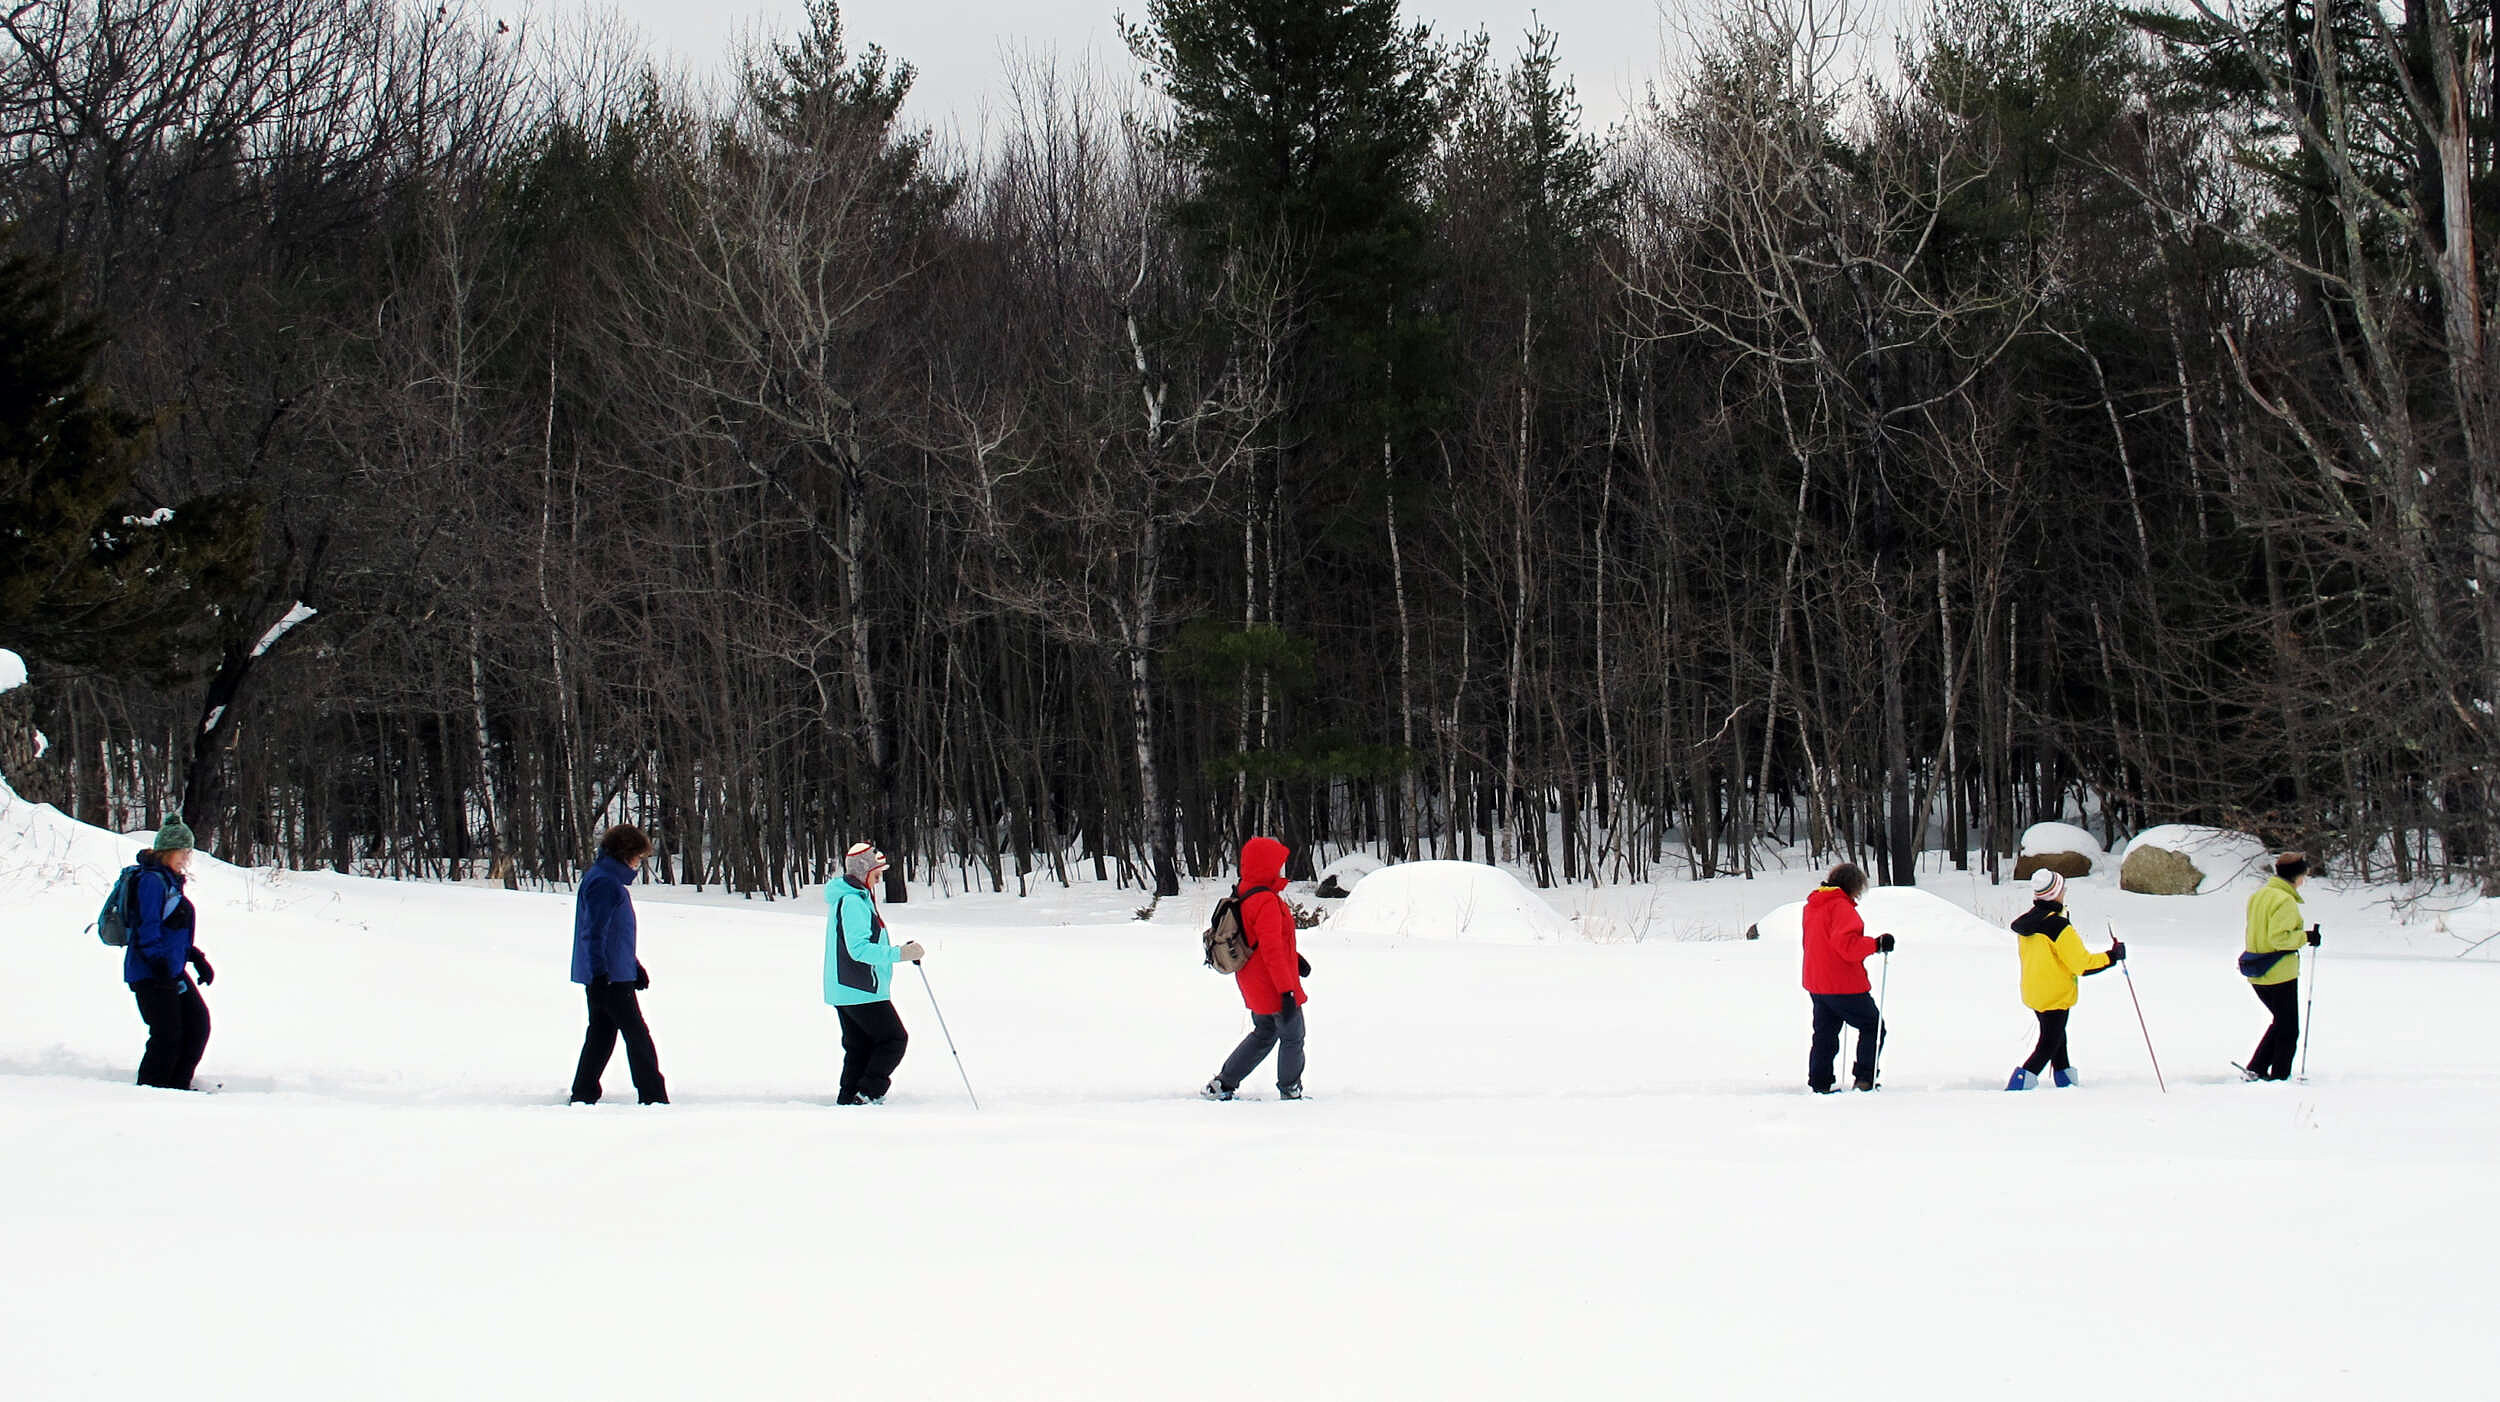 Snowshoers walk in a line through the snow. (photo © Brett Amy Thelen)